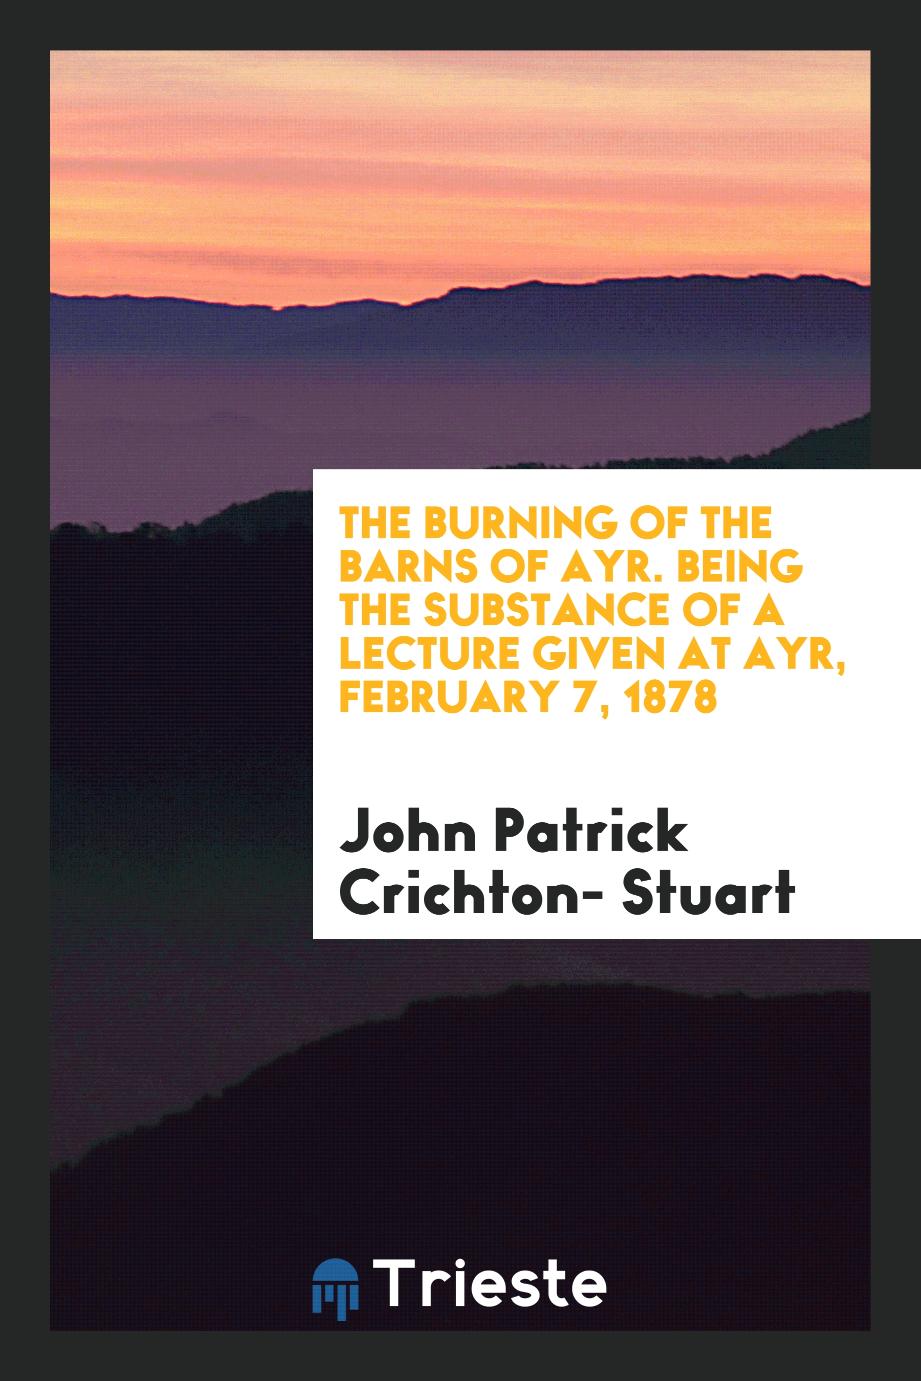 The Burning of the Barns of Ayr. Being the Substance of a Lecture Given at Ayr, February 7, 1878